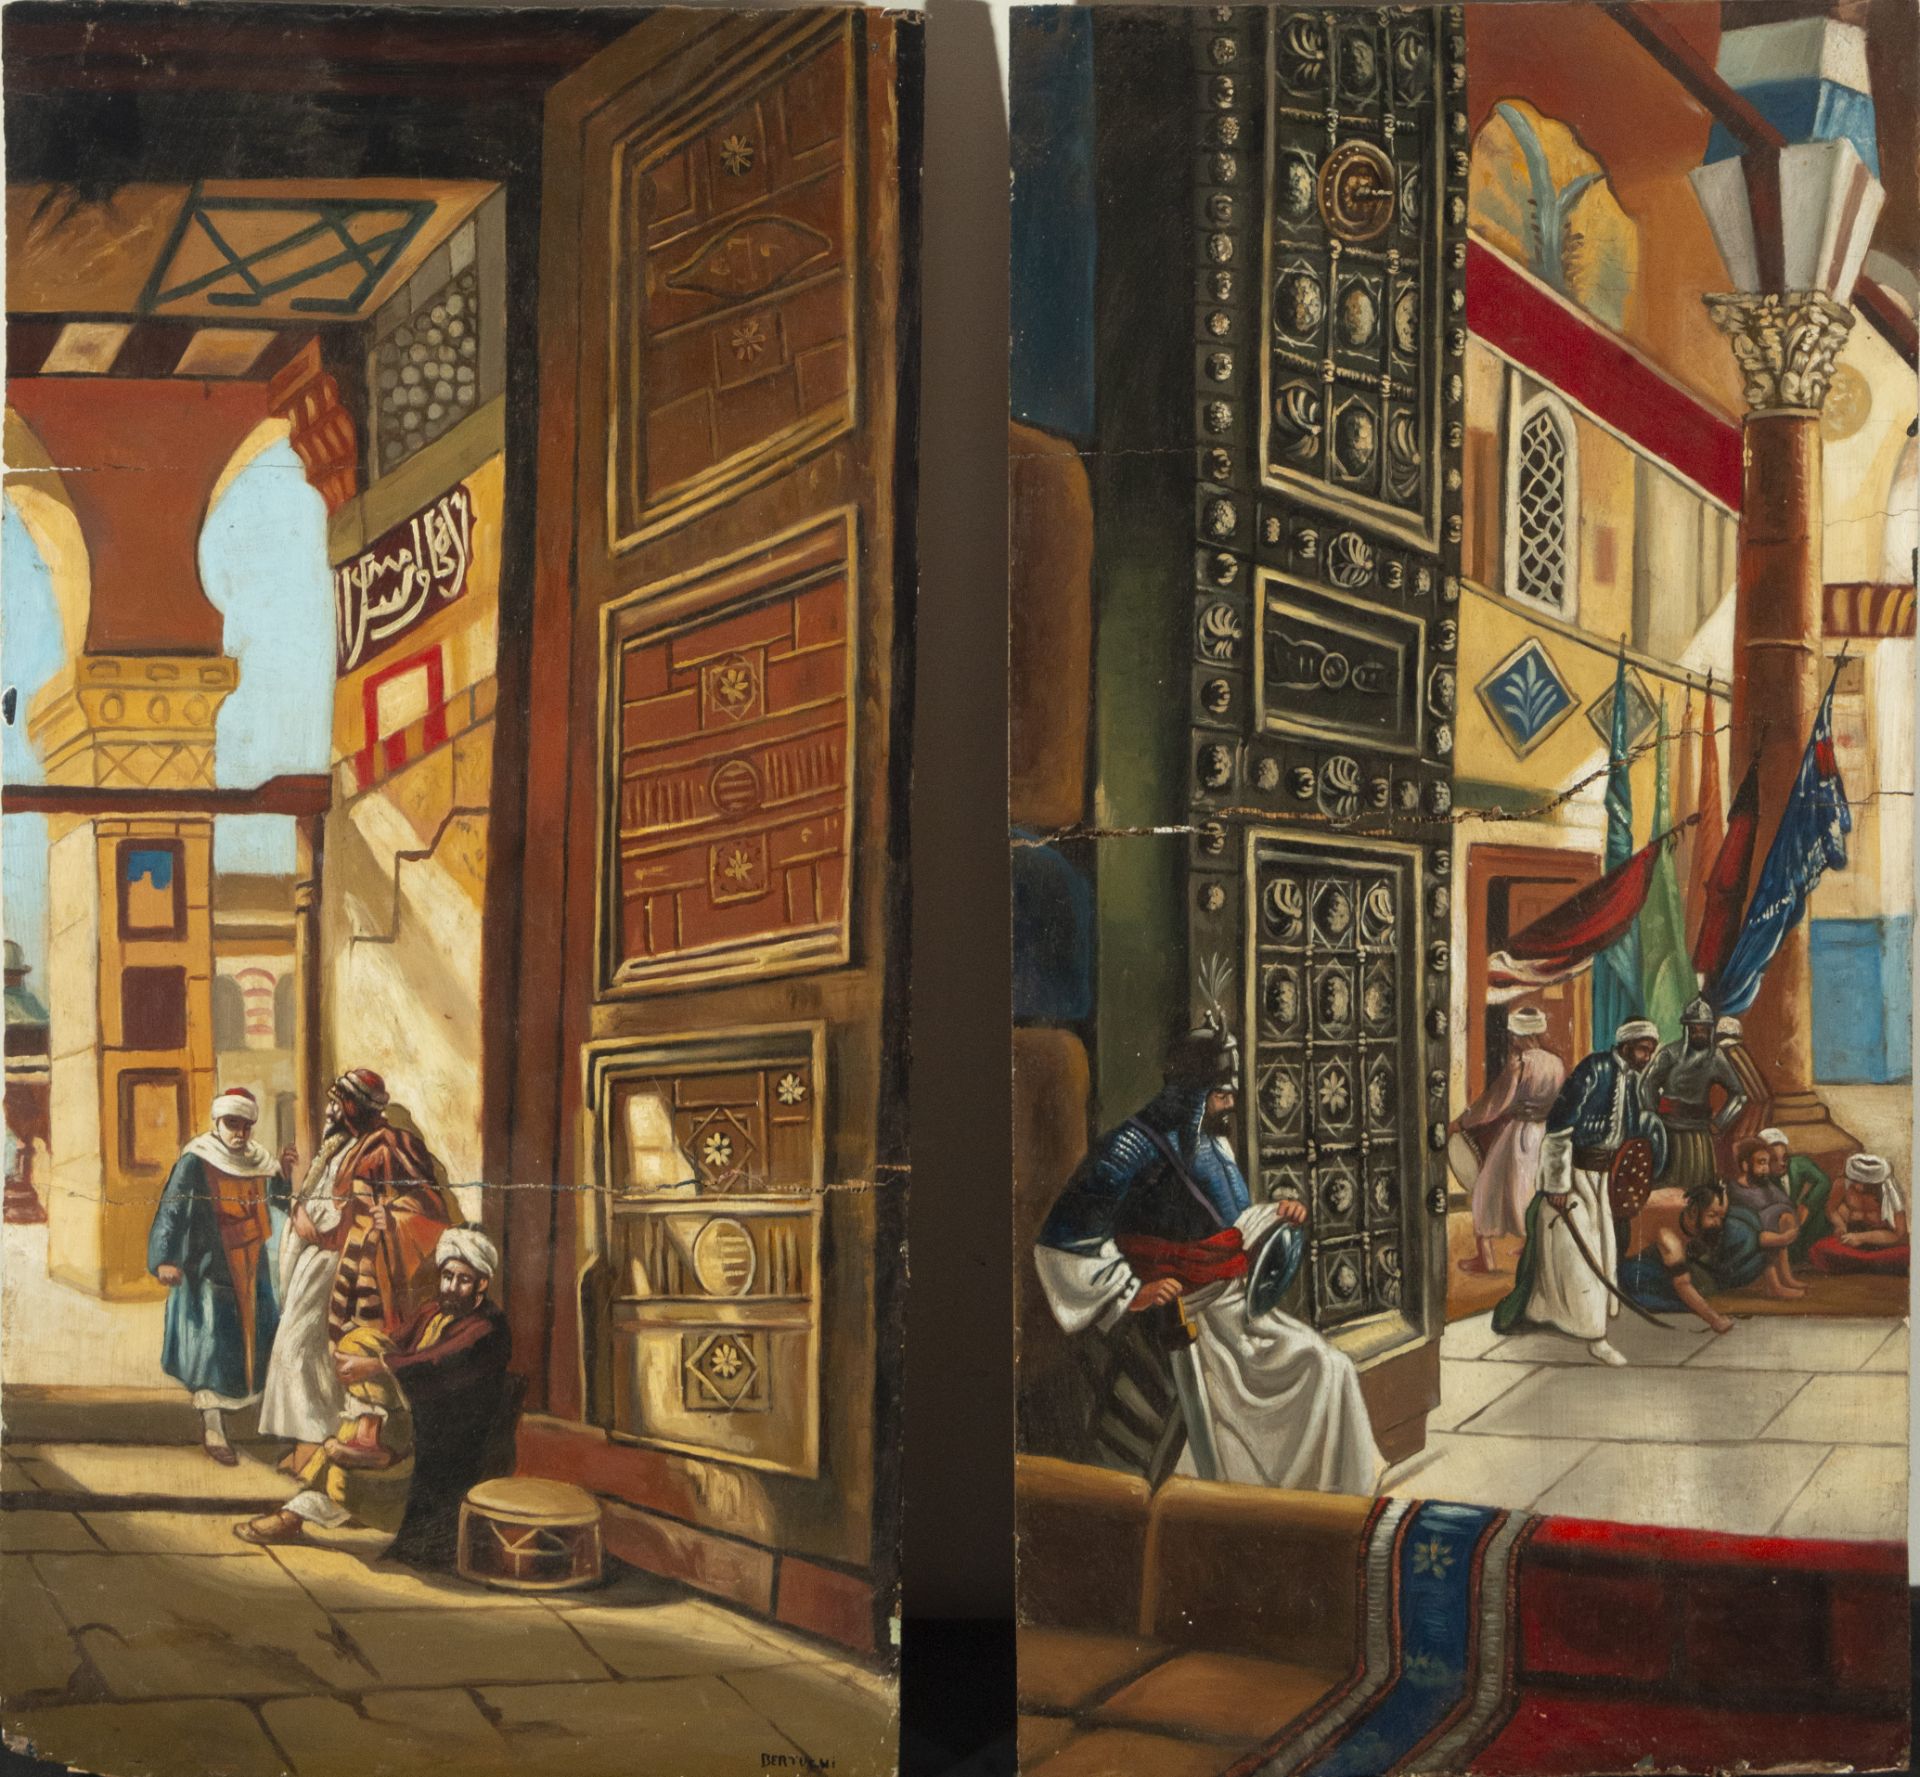 Pair of Orientalist scenes from the Souk and Interior of the Orientalist Palace, oil on panel, signe